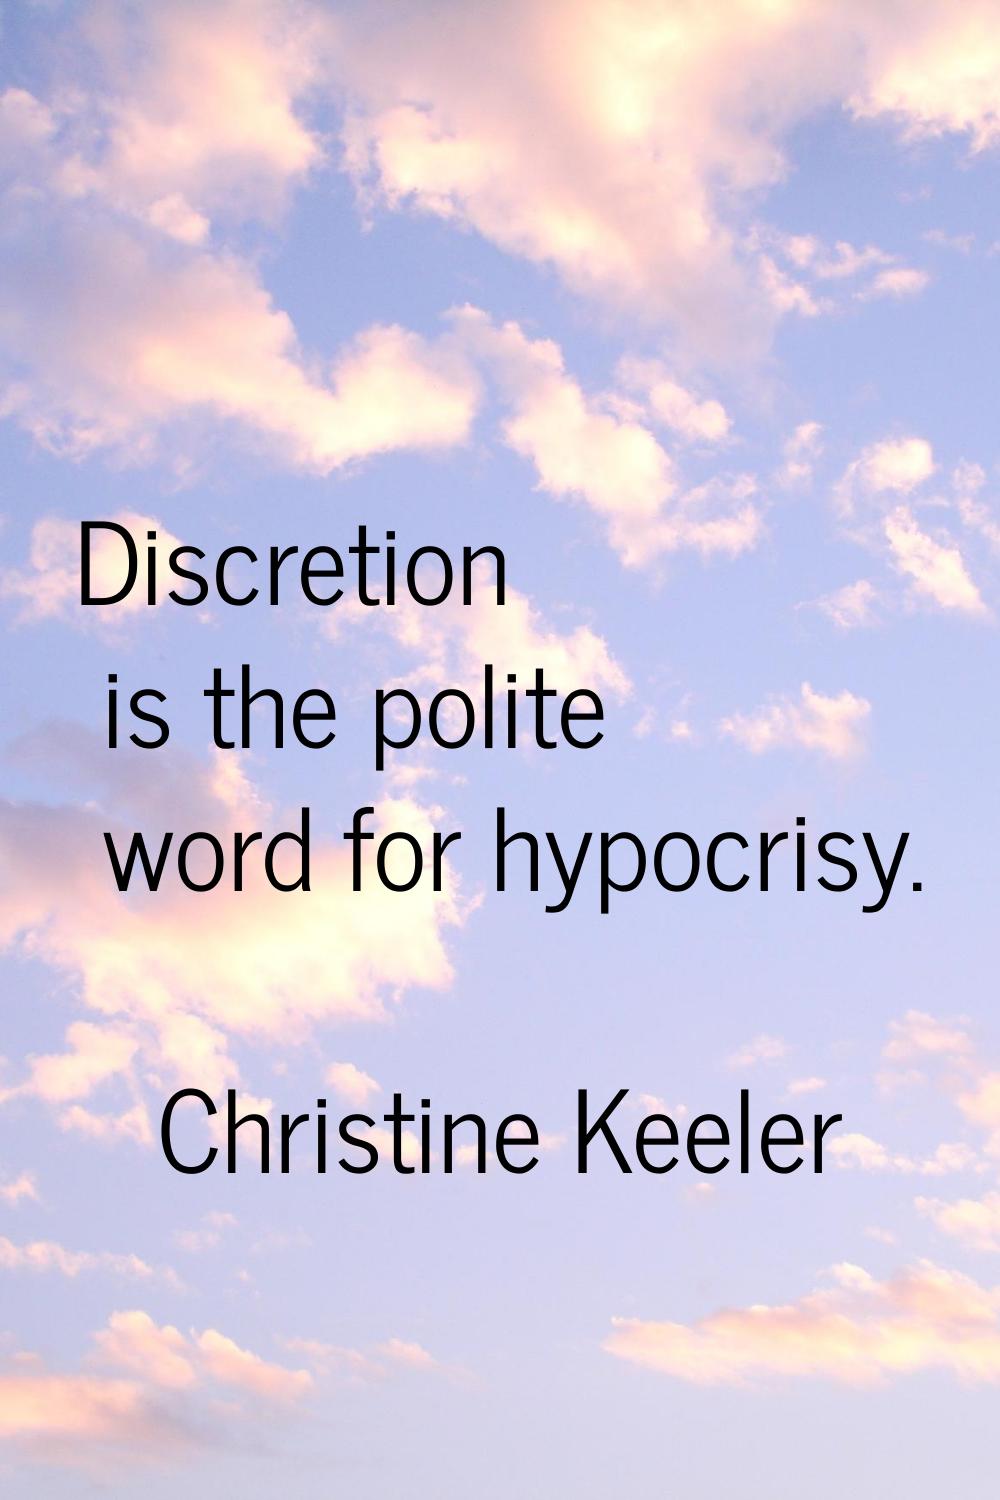 Discretion is the polite word for hypocrisy.